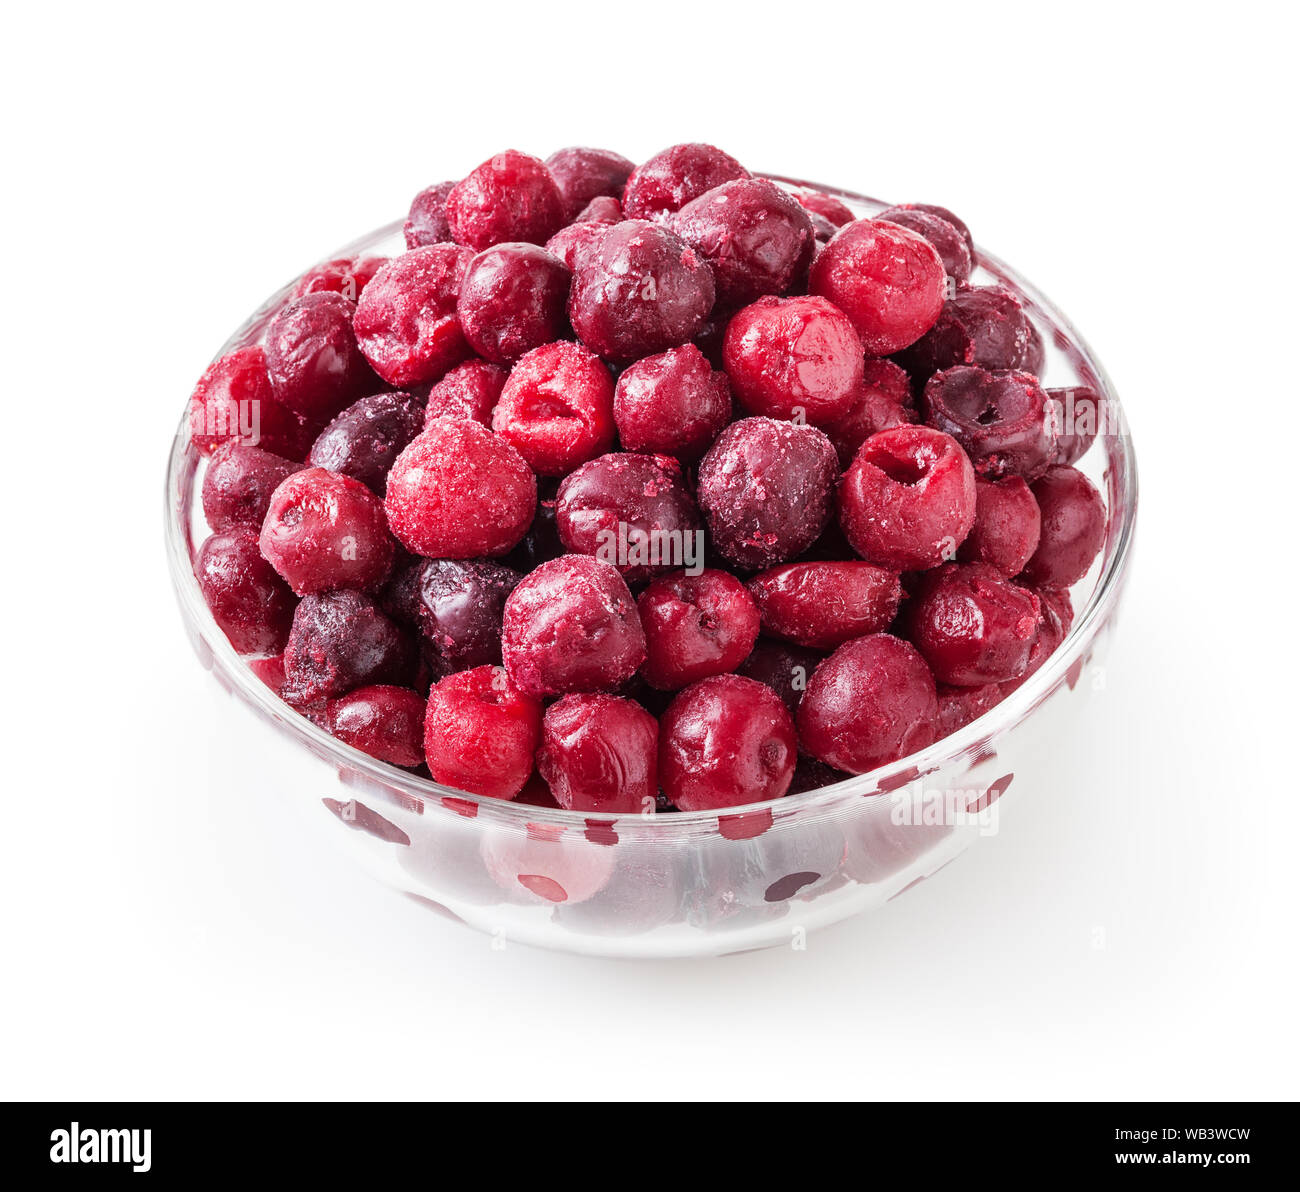 Frozen cherries in glass bowl isolated on white background with clipping path Stock Photo